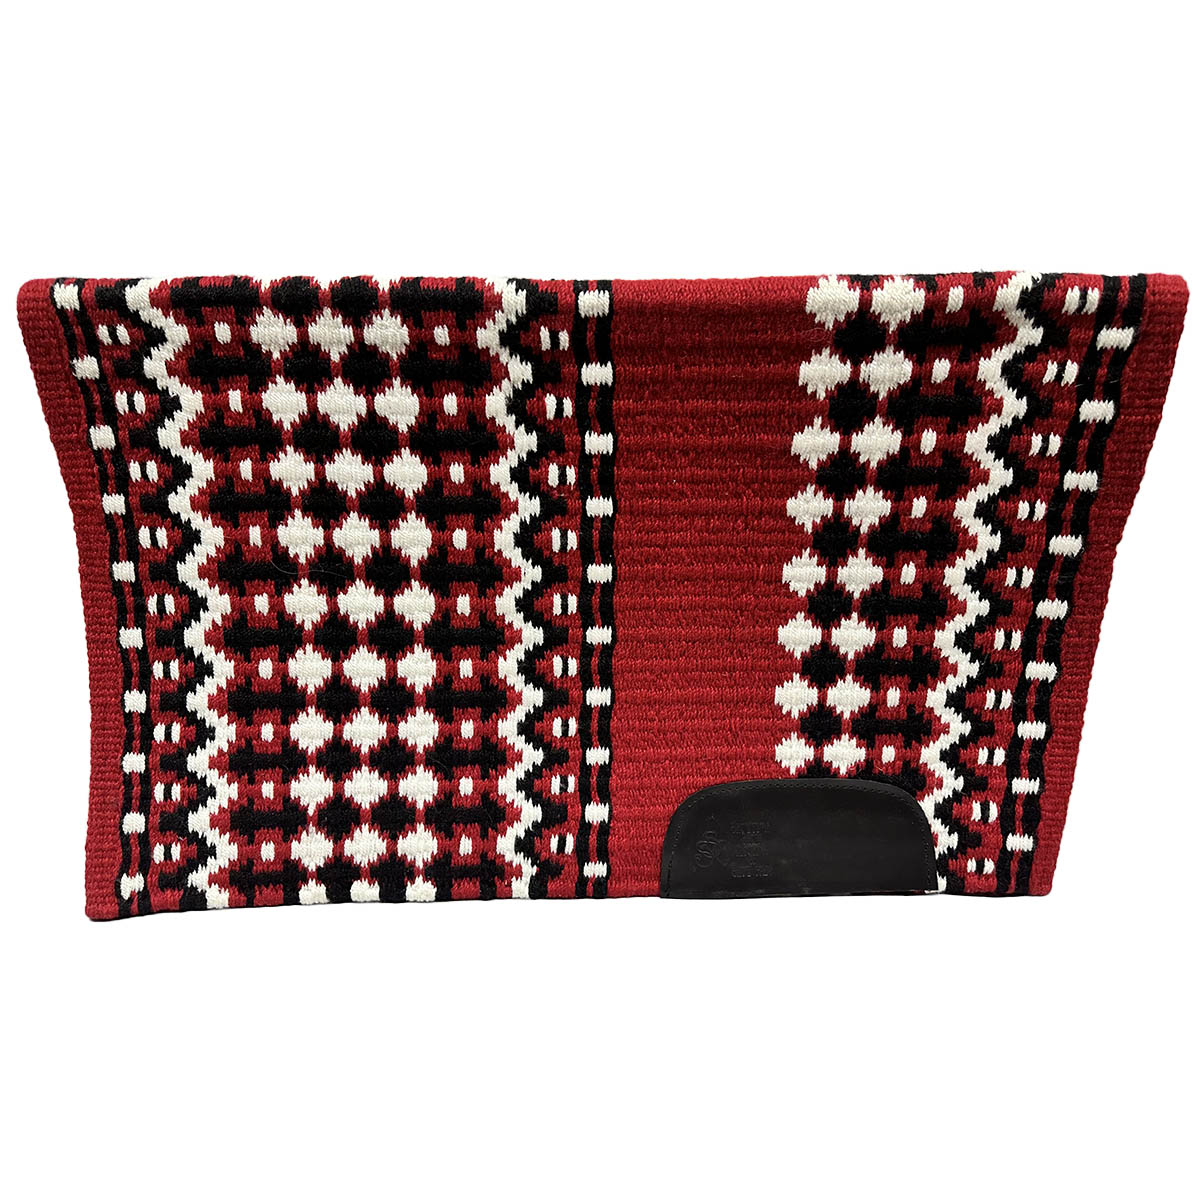 Classic Show Red, Black, and White saddle pad